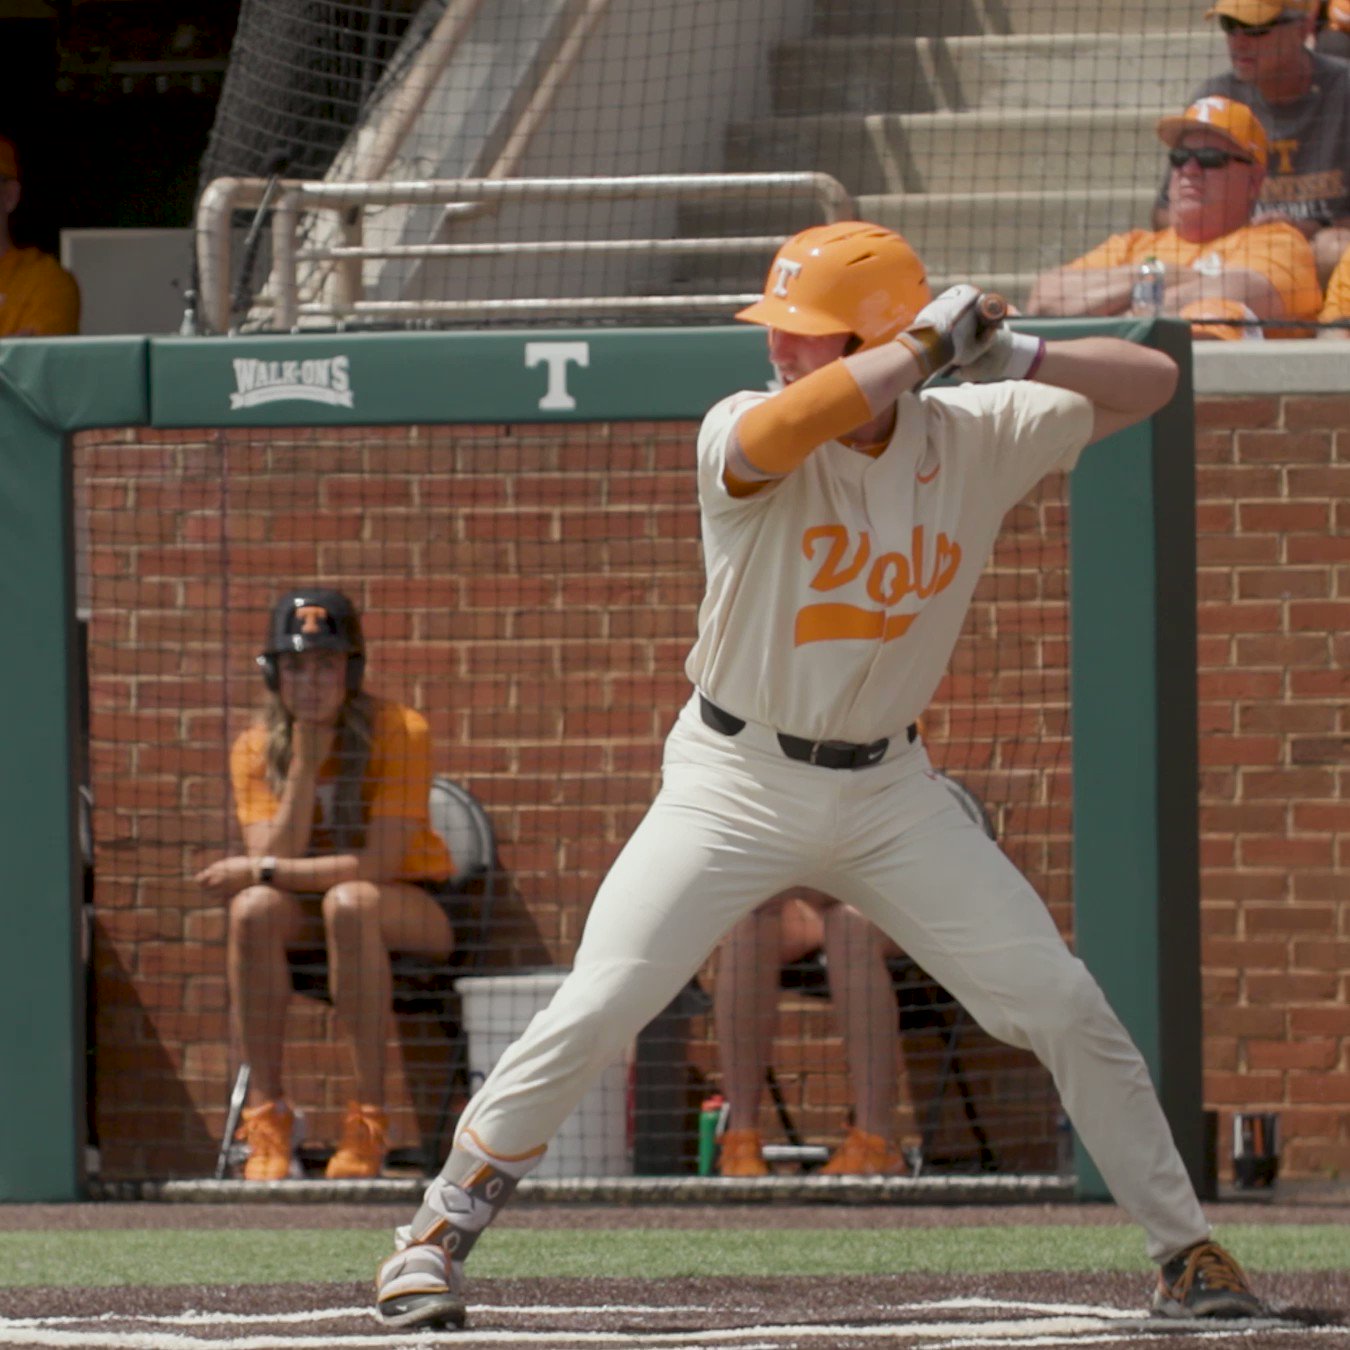 Tennessee Baseball on Twitter: Brought them bats out Saturday